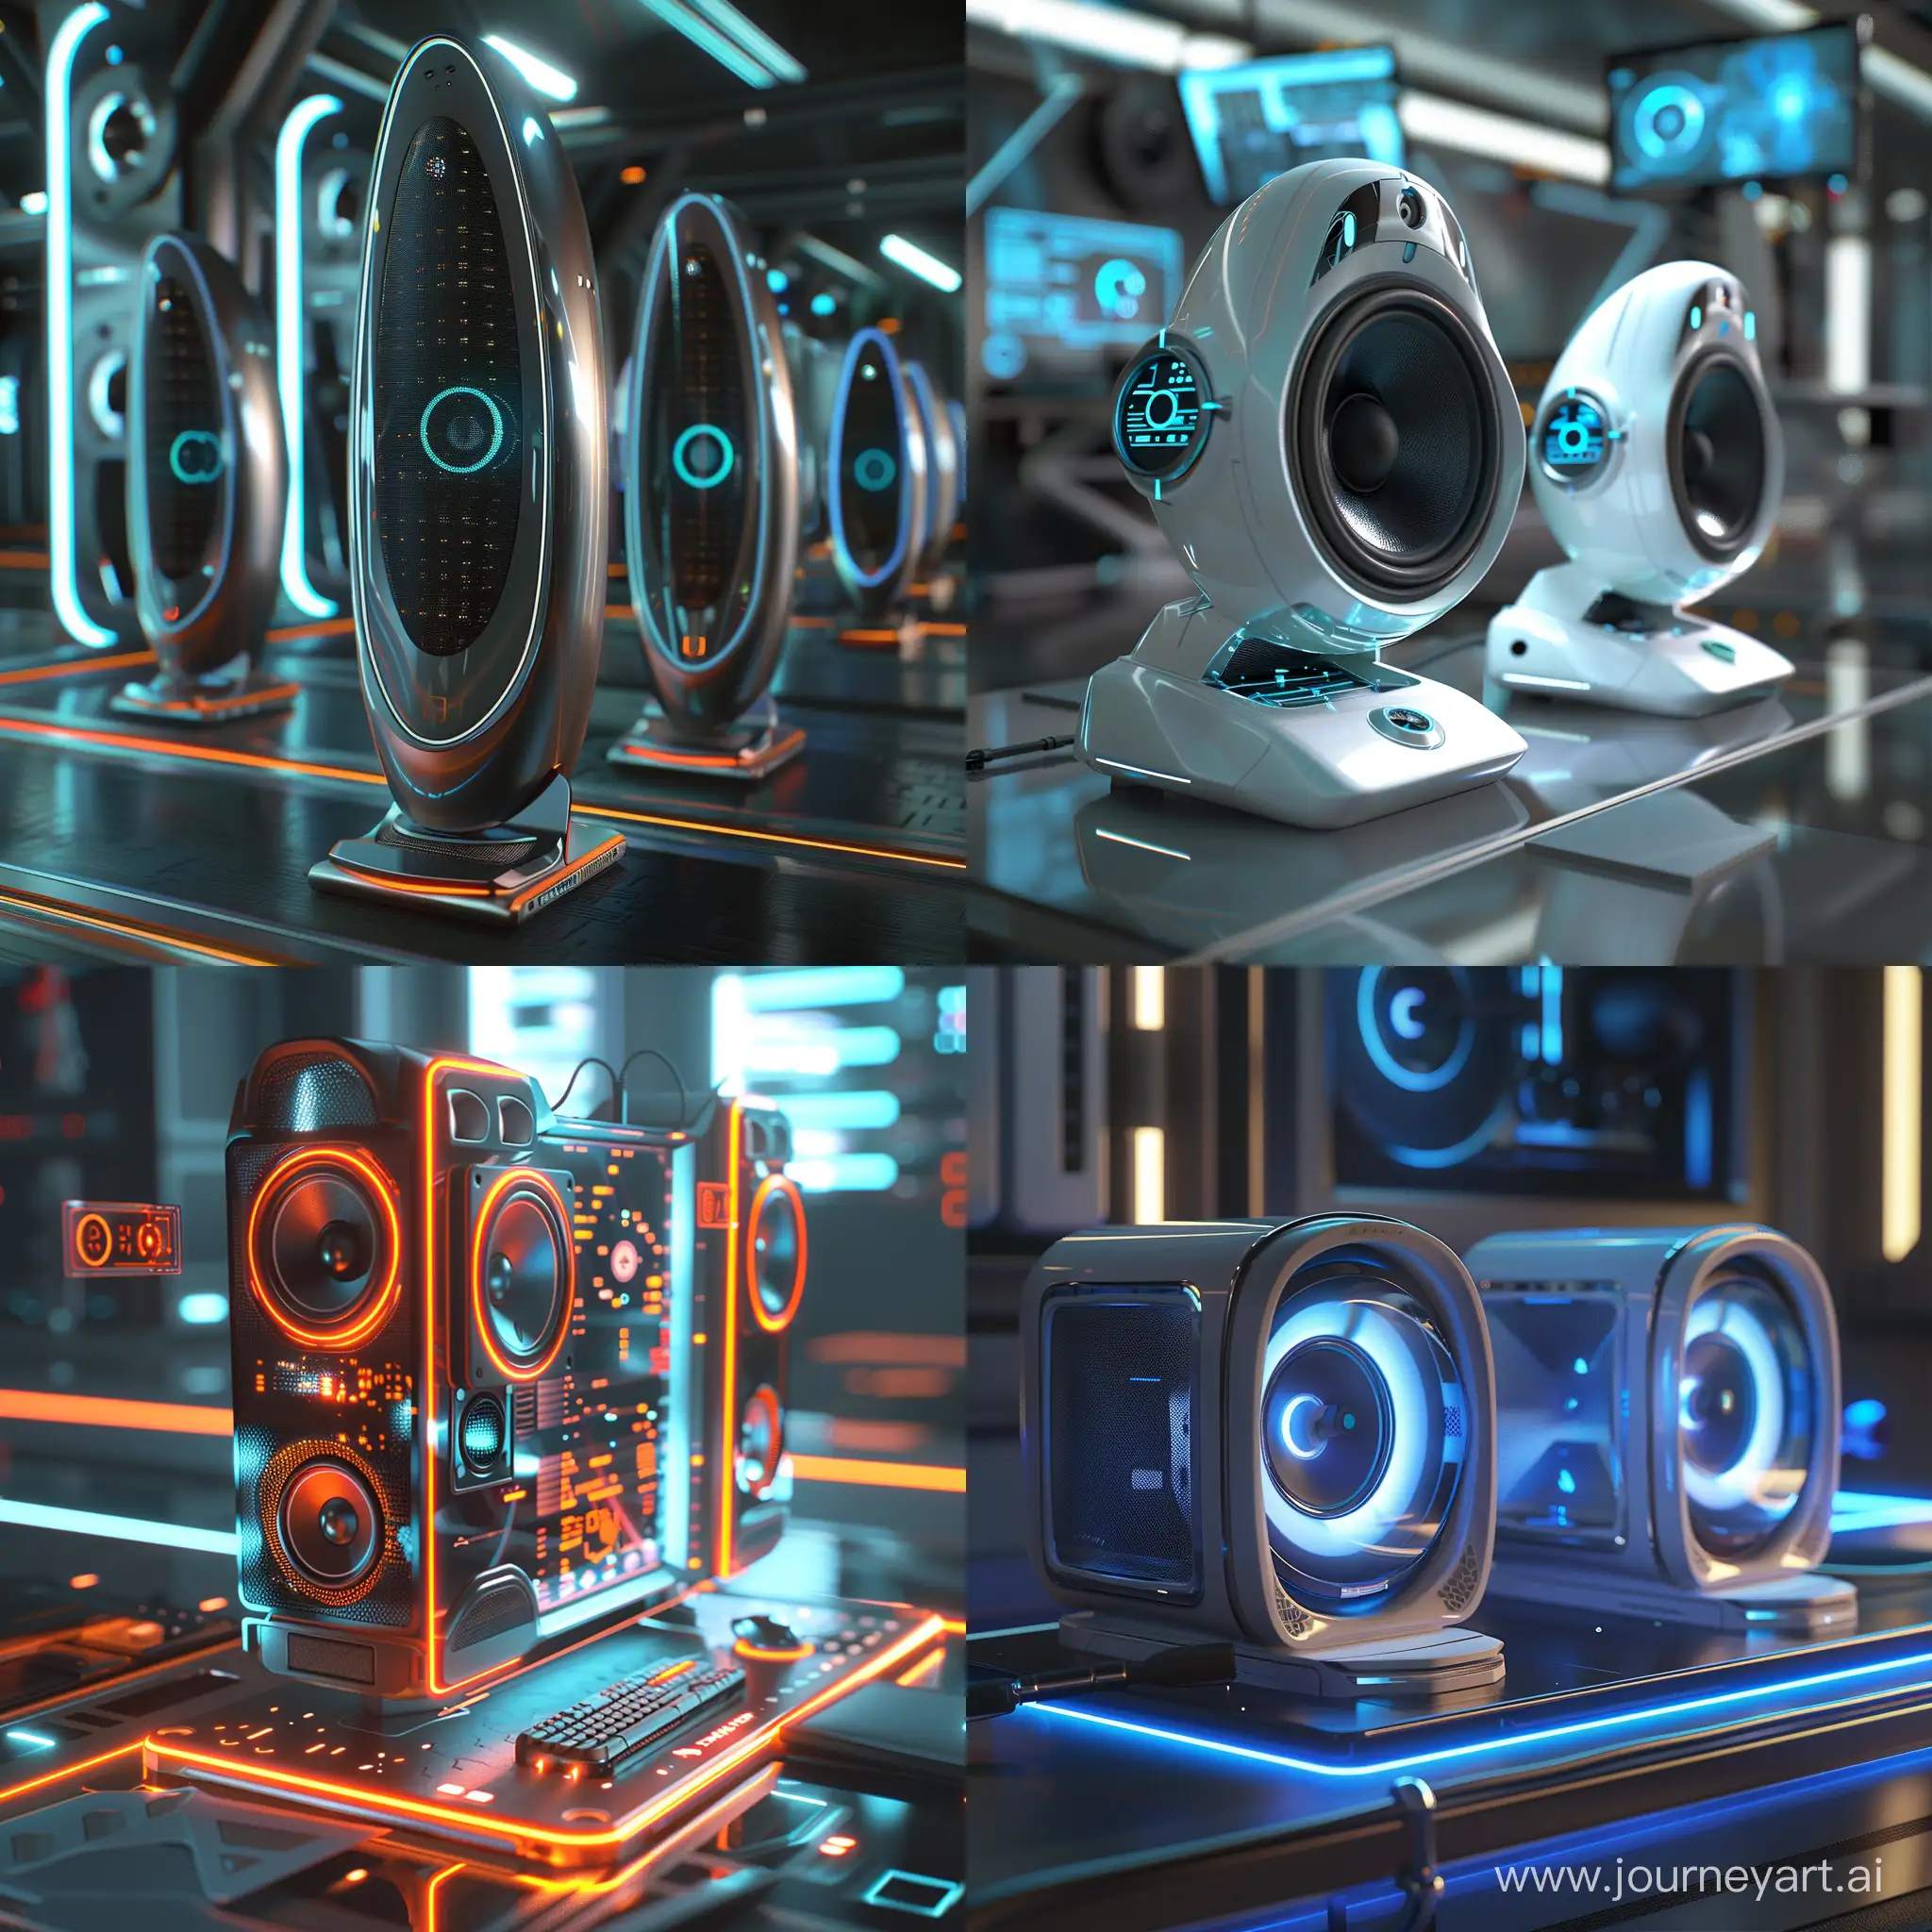 Futuristic-PC-Speakers-in-HighTech-World-with-Holographic-Interfaces